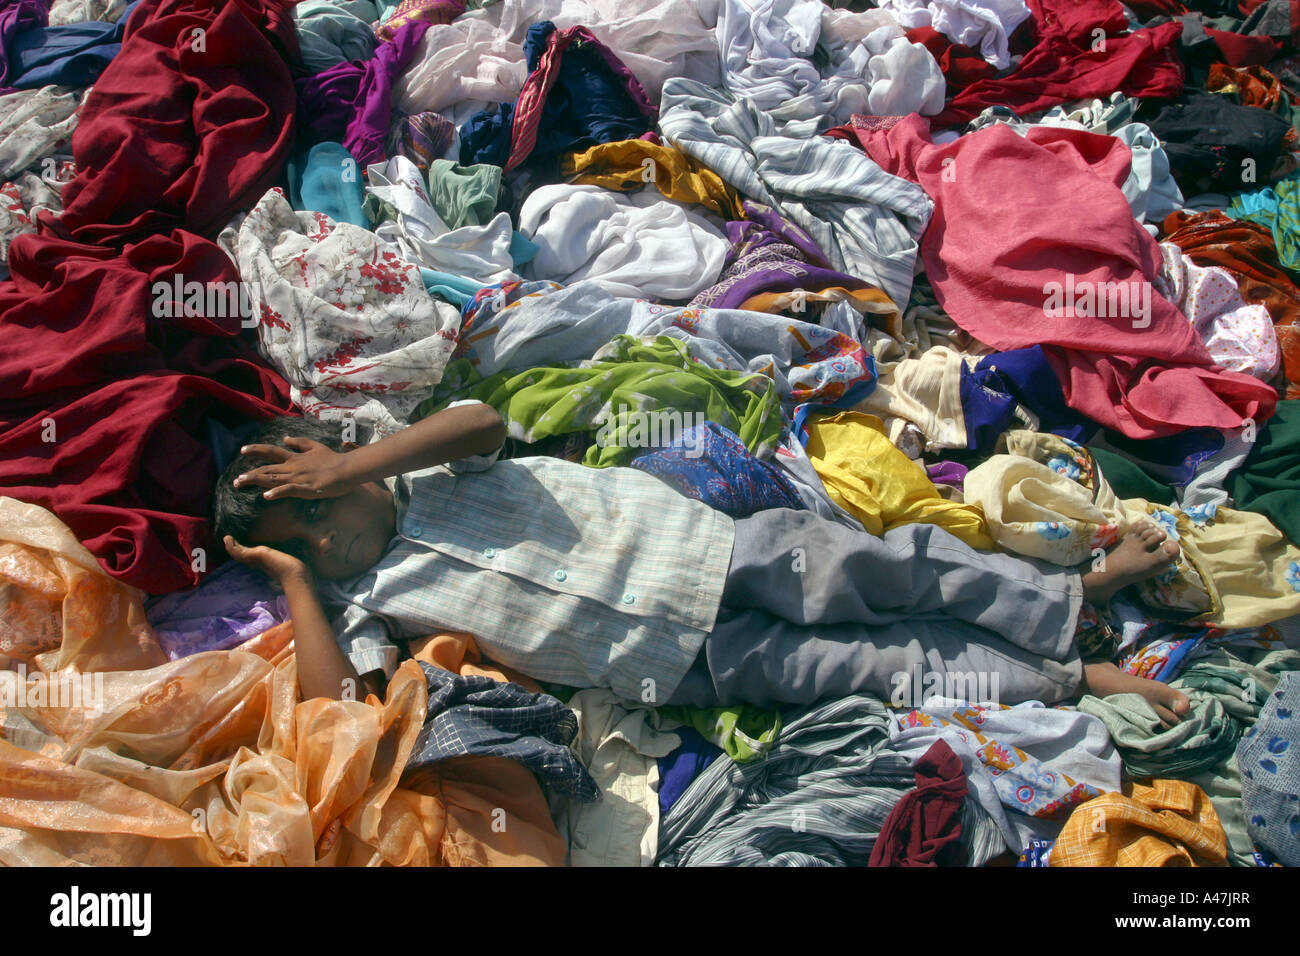 A young boy rests in a pile of clothes given as aid after the tsunami hit in Nagapattinam in India Stock Photo